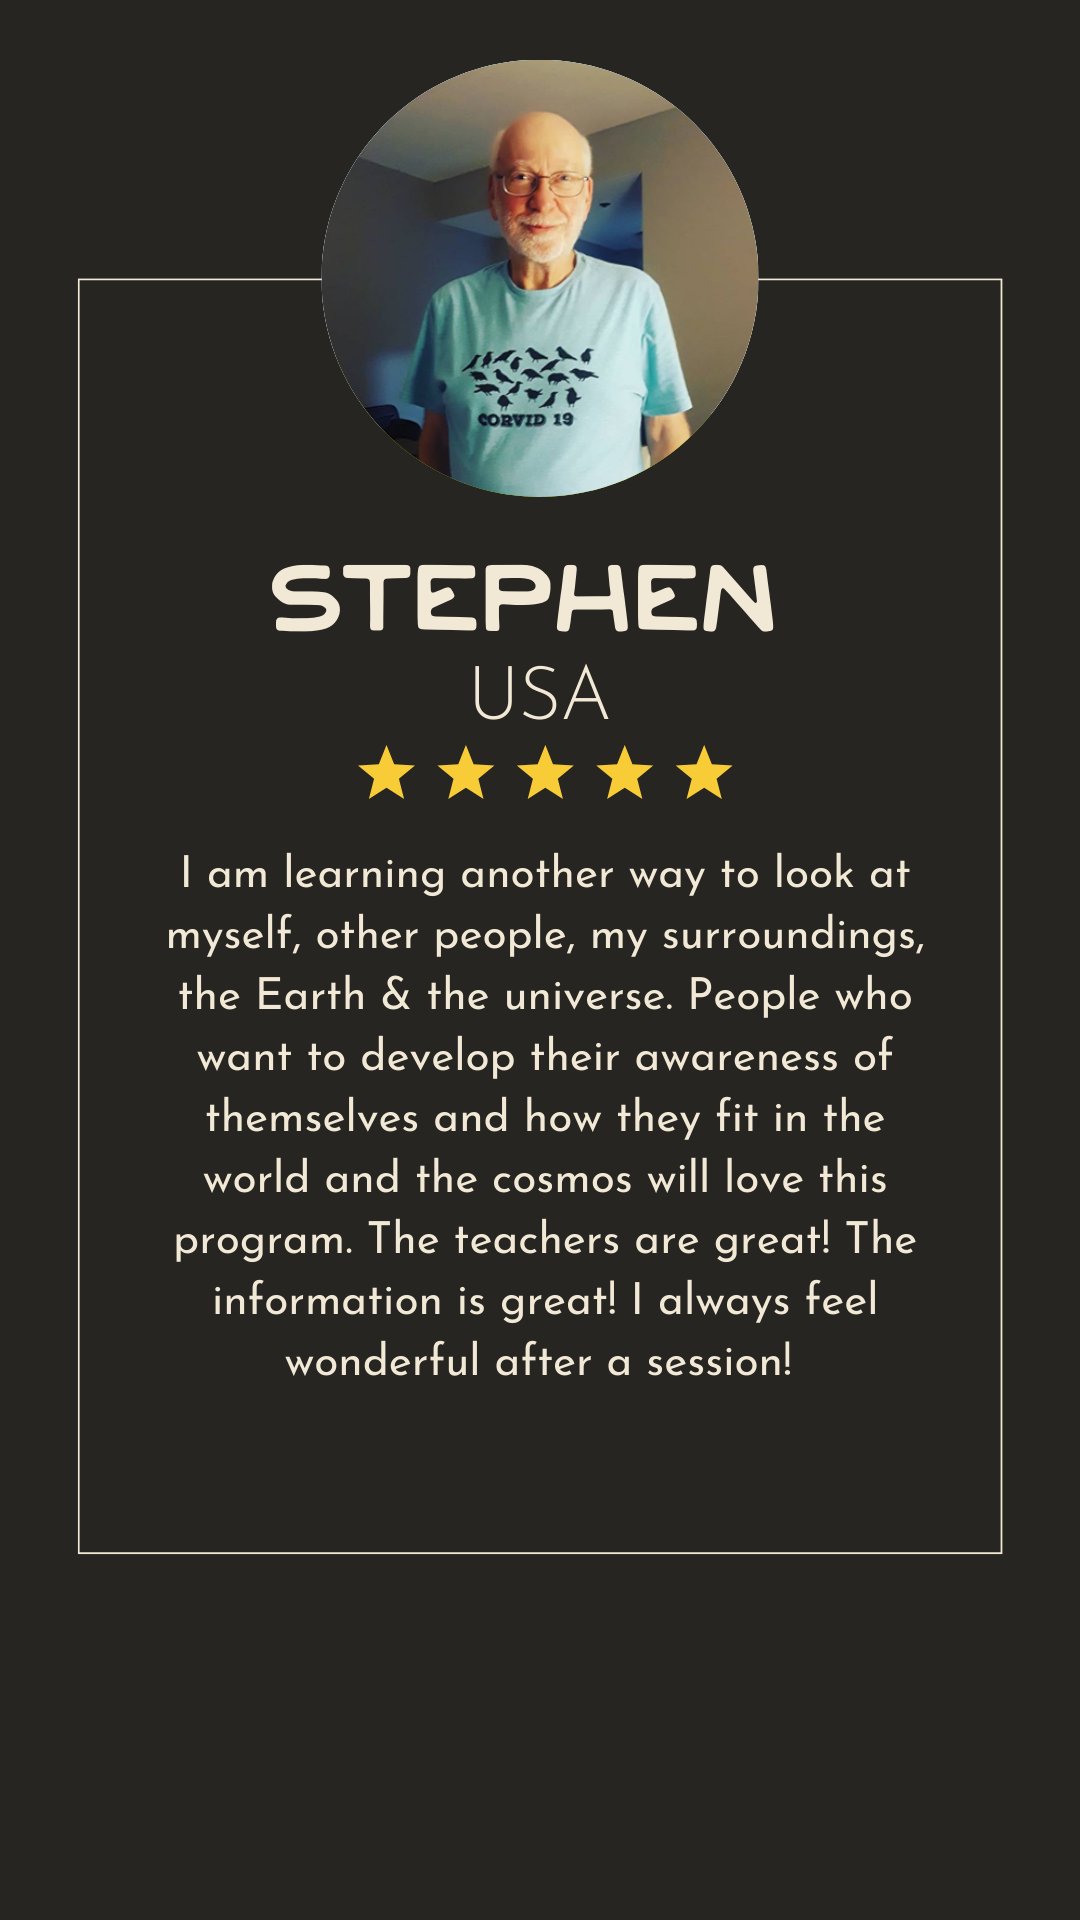 Stephen feedback after learning with our self development courses.